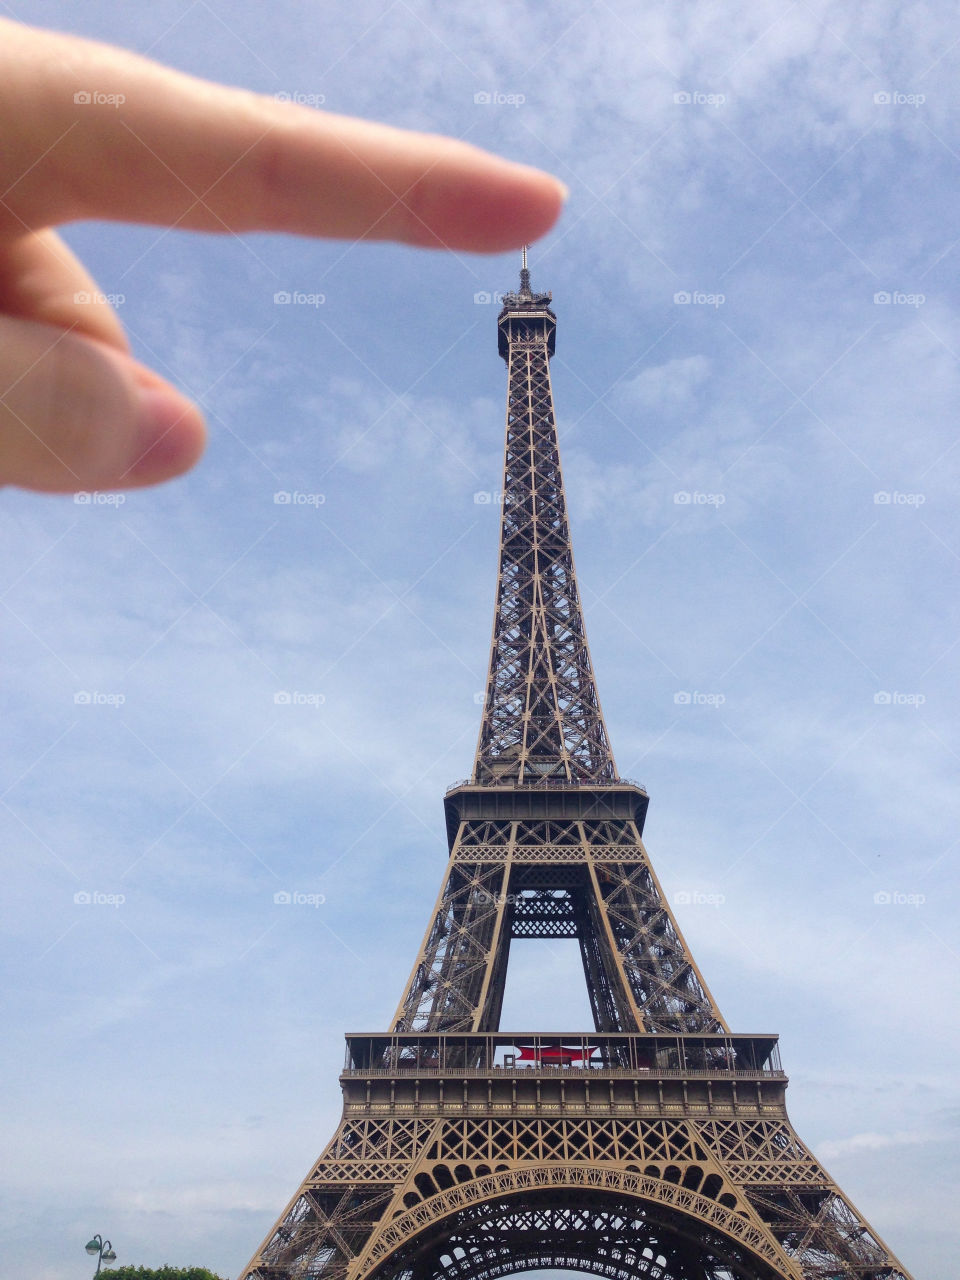 Touching the tower 